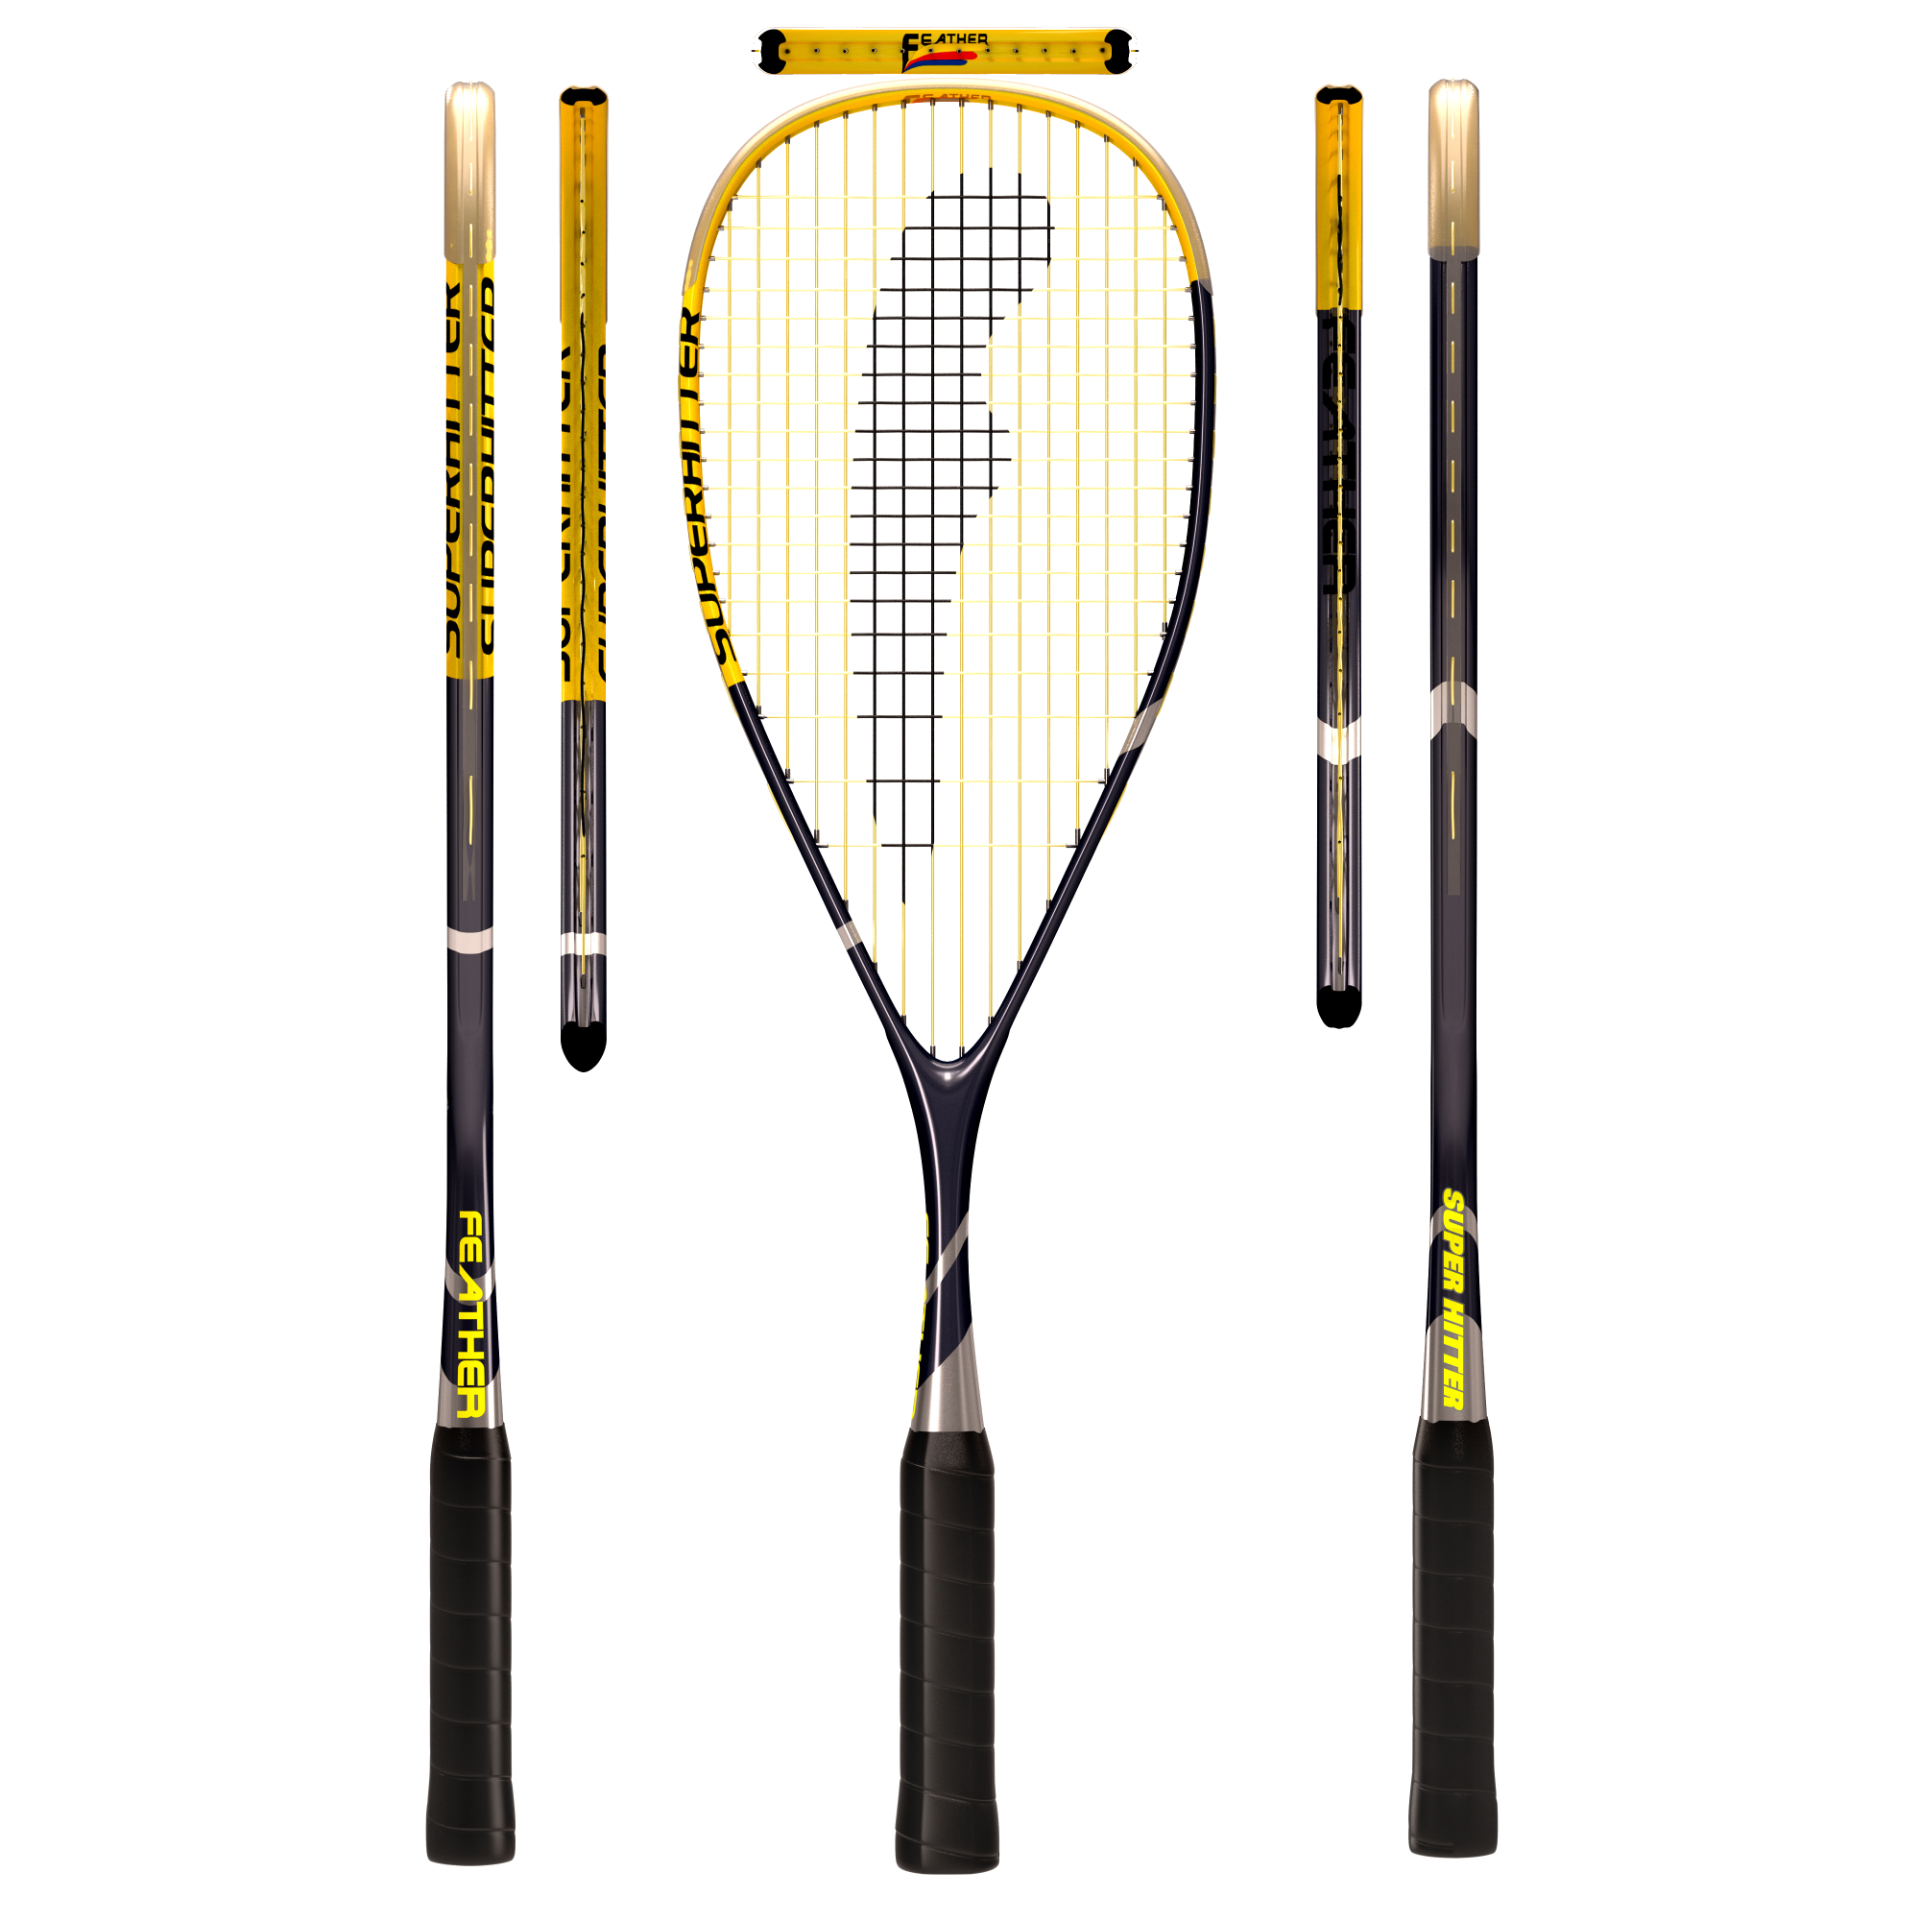 3d product rendering of a tennis racquet  